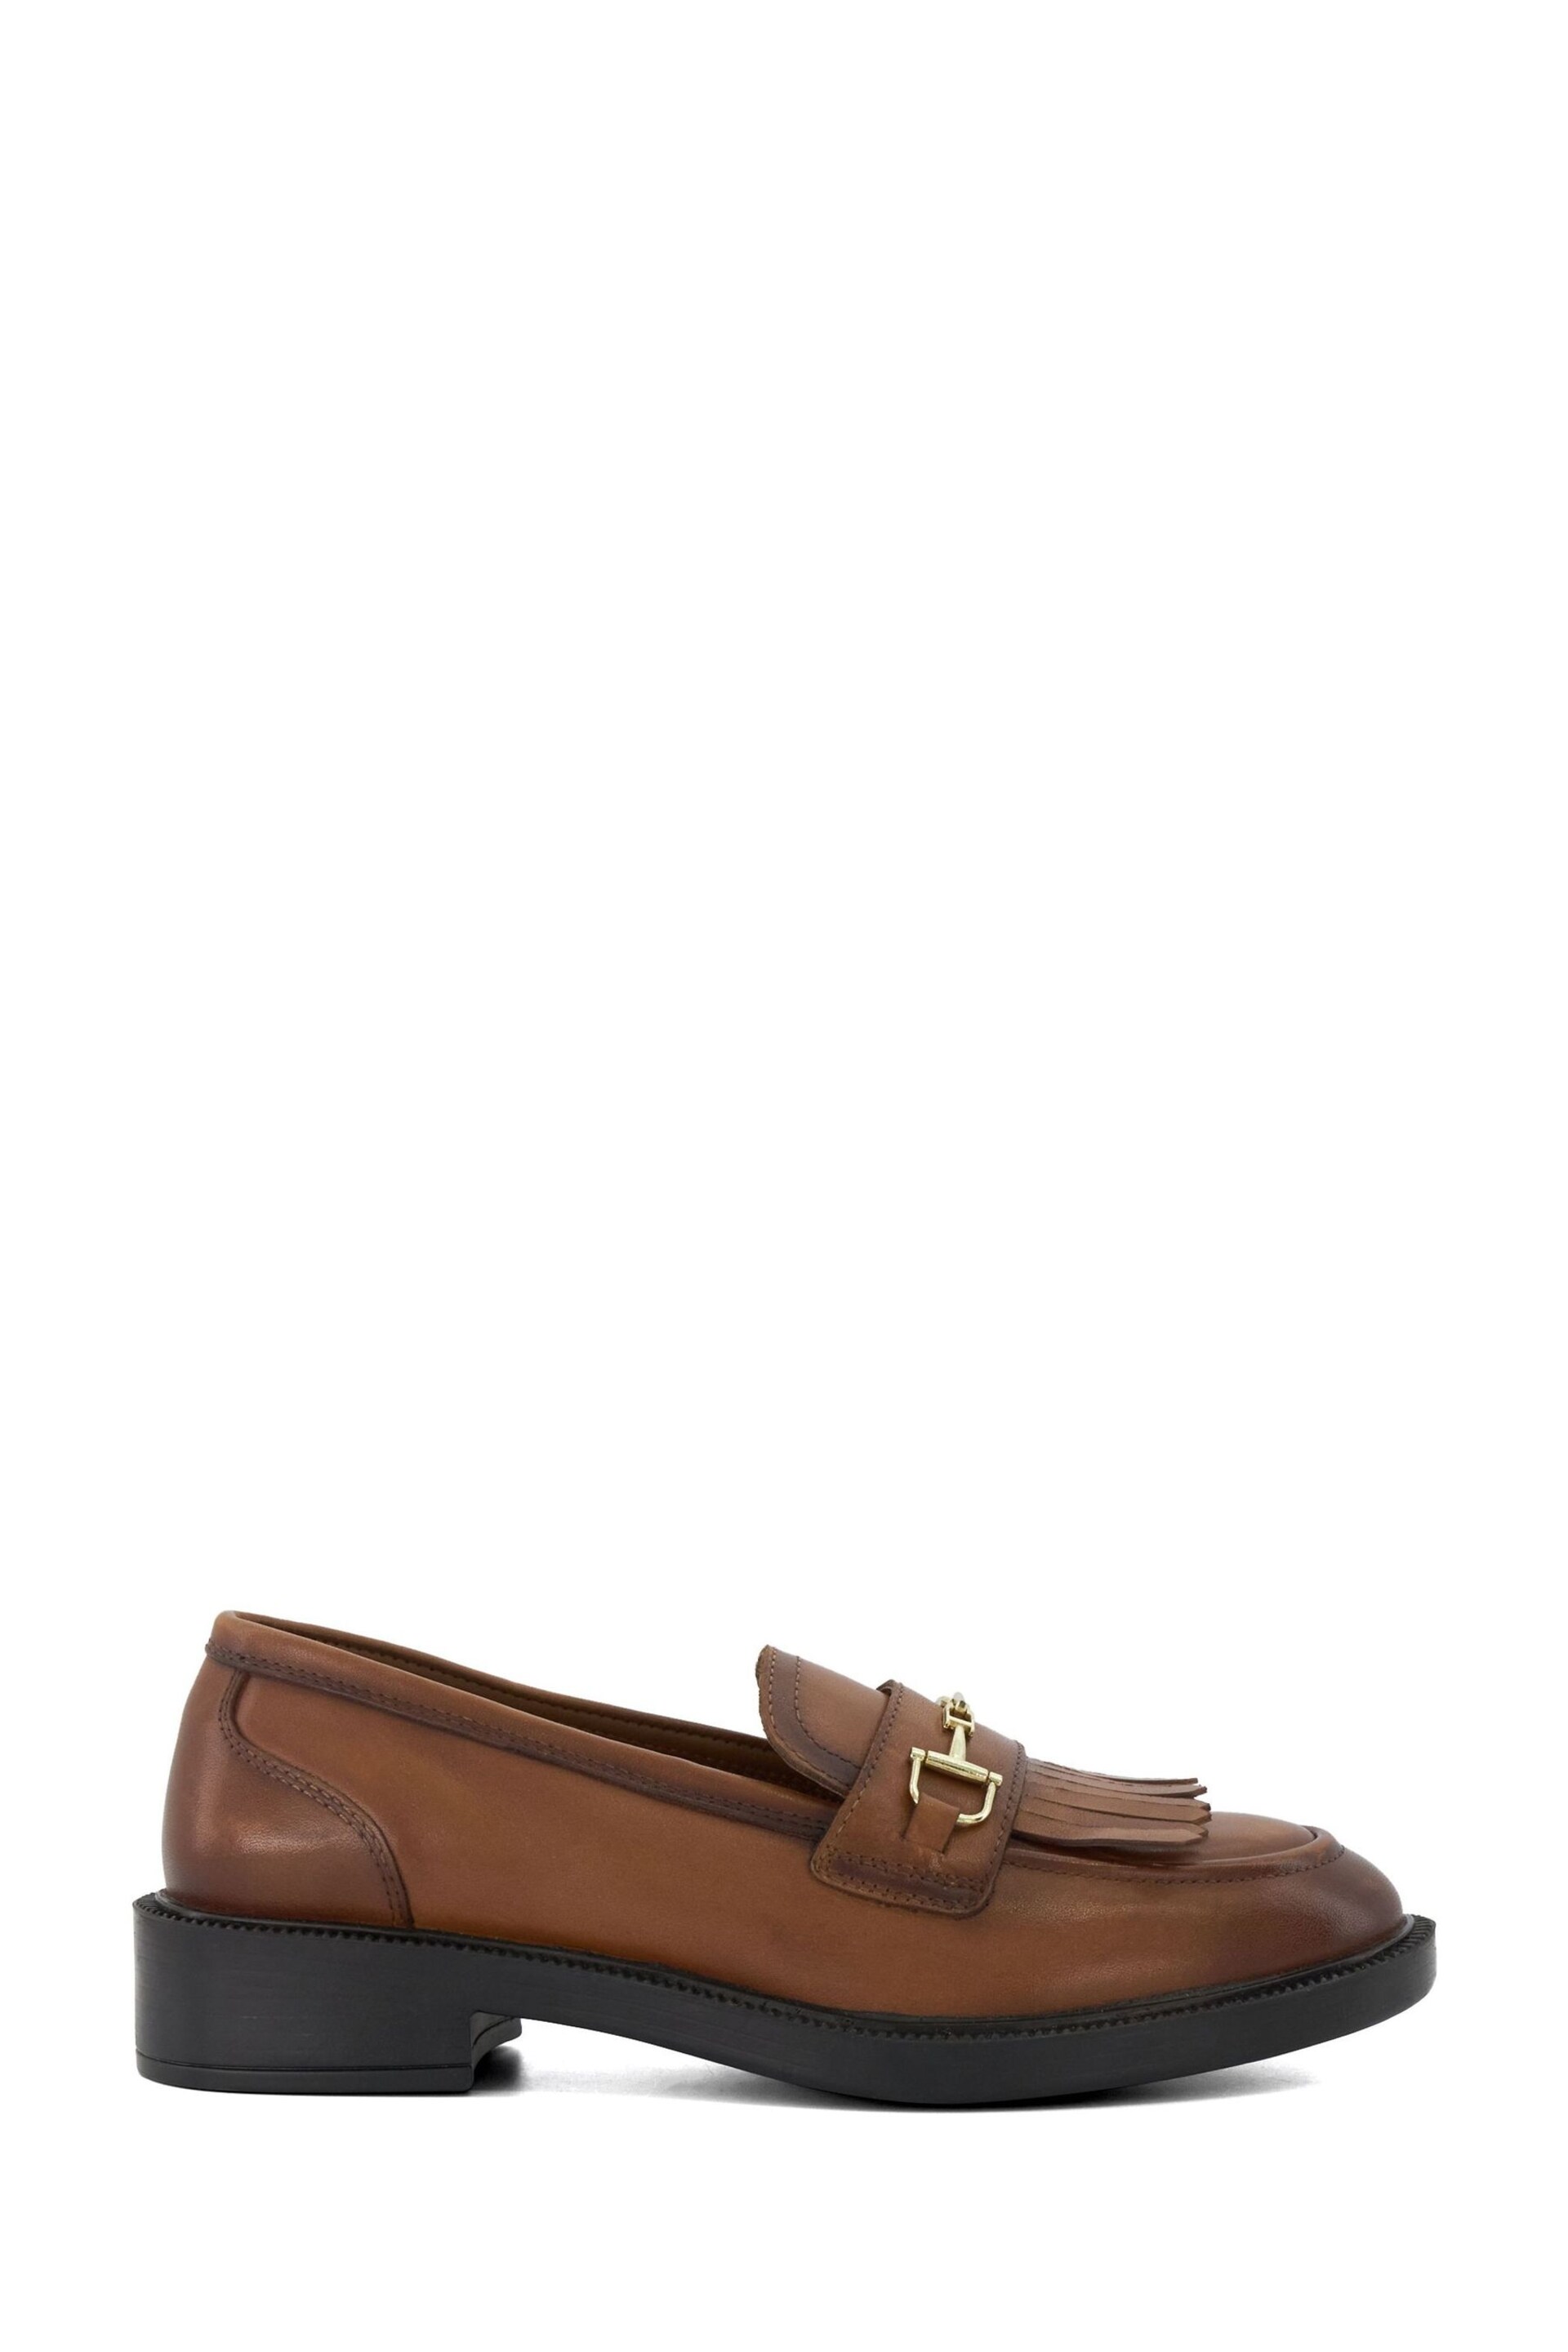 Dune London Brown Guided DD Snaffle Fringe Loafers - Image 1 of 7